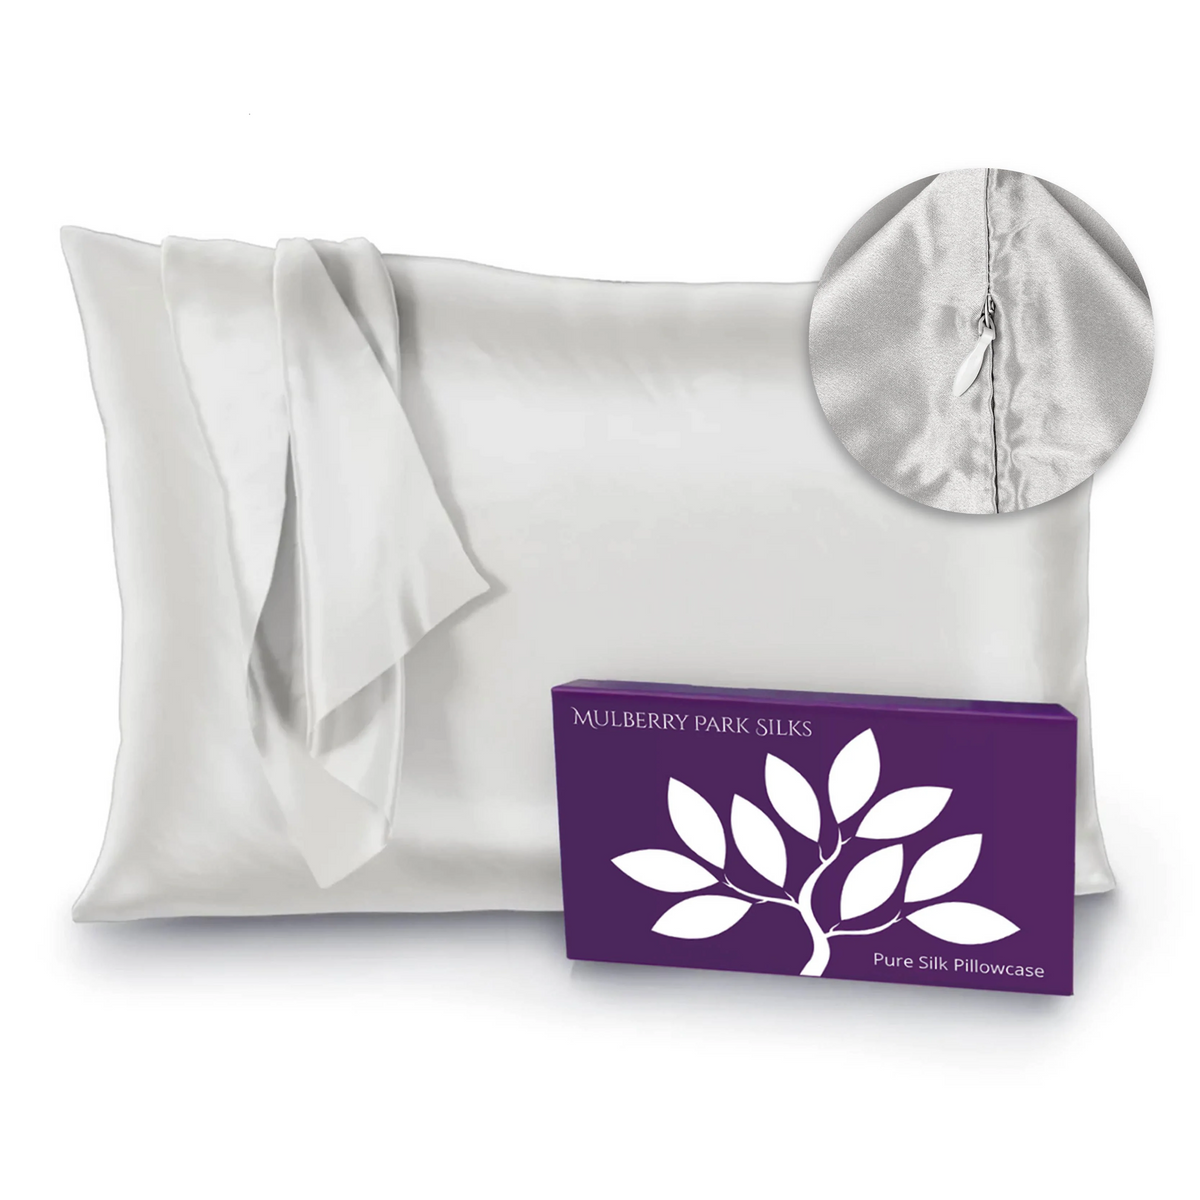 Ivory Silo Image of Mulberry Park Silks Deluxe 22 Momme Pure Silk Pillowcase with Zipper Detail and Box